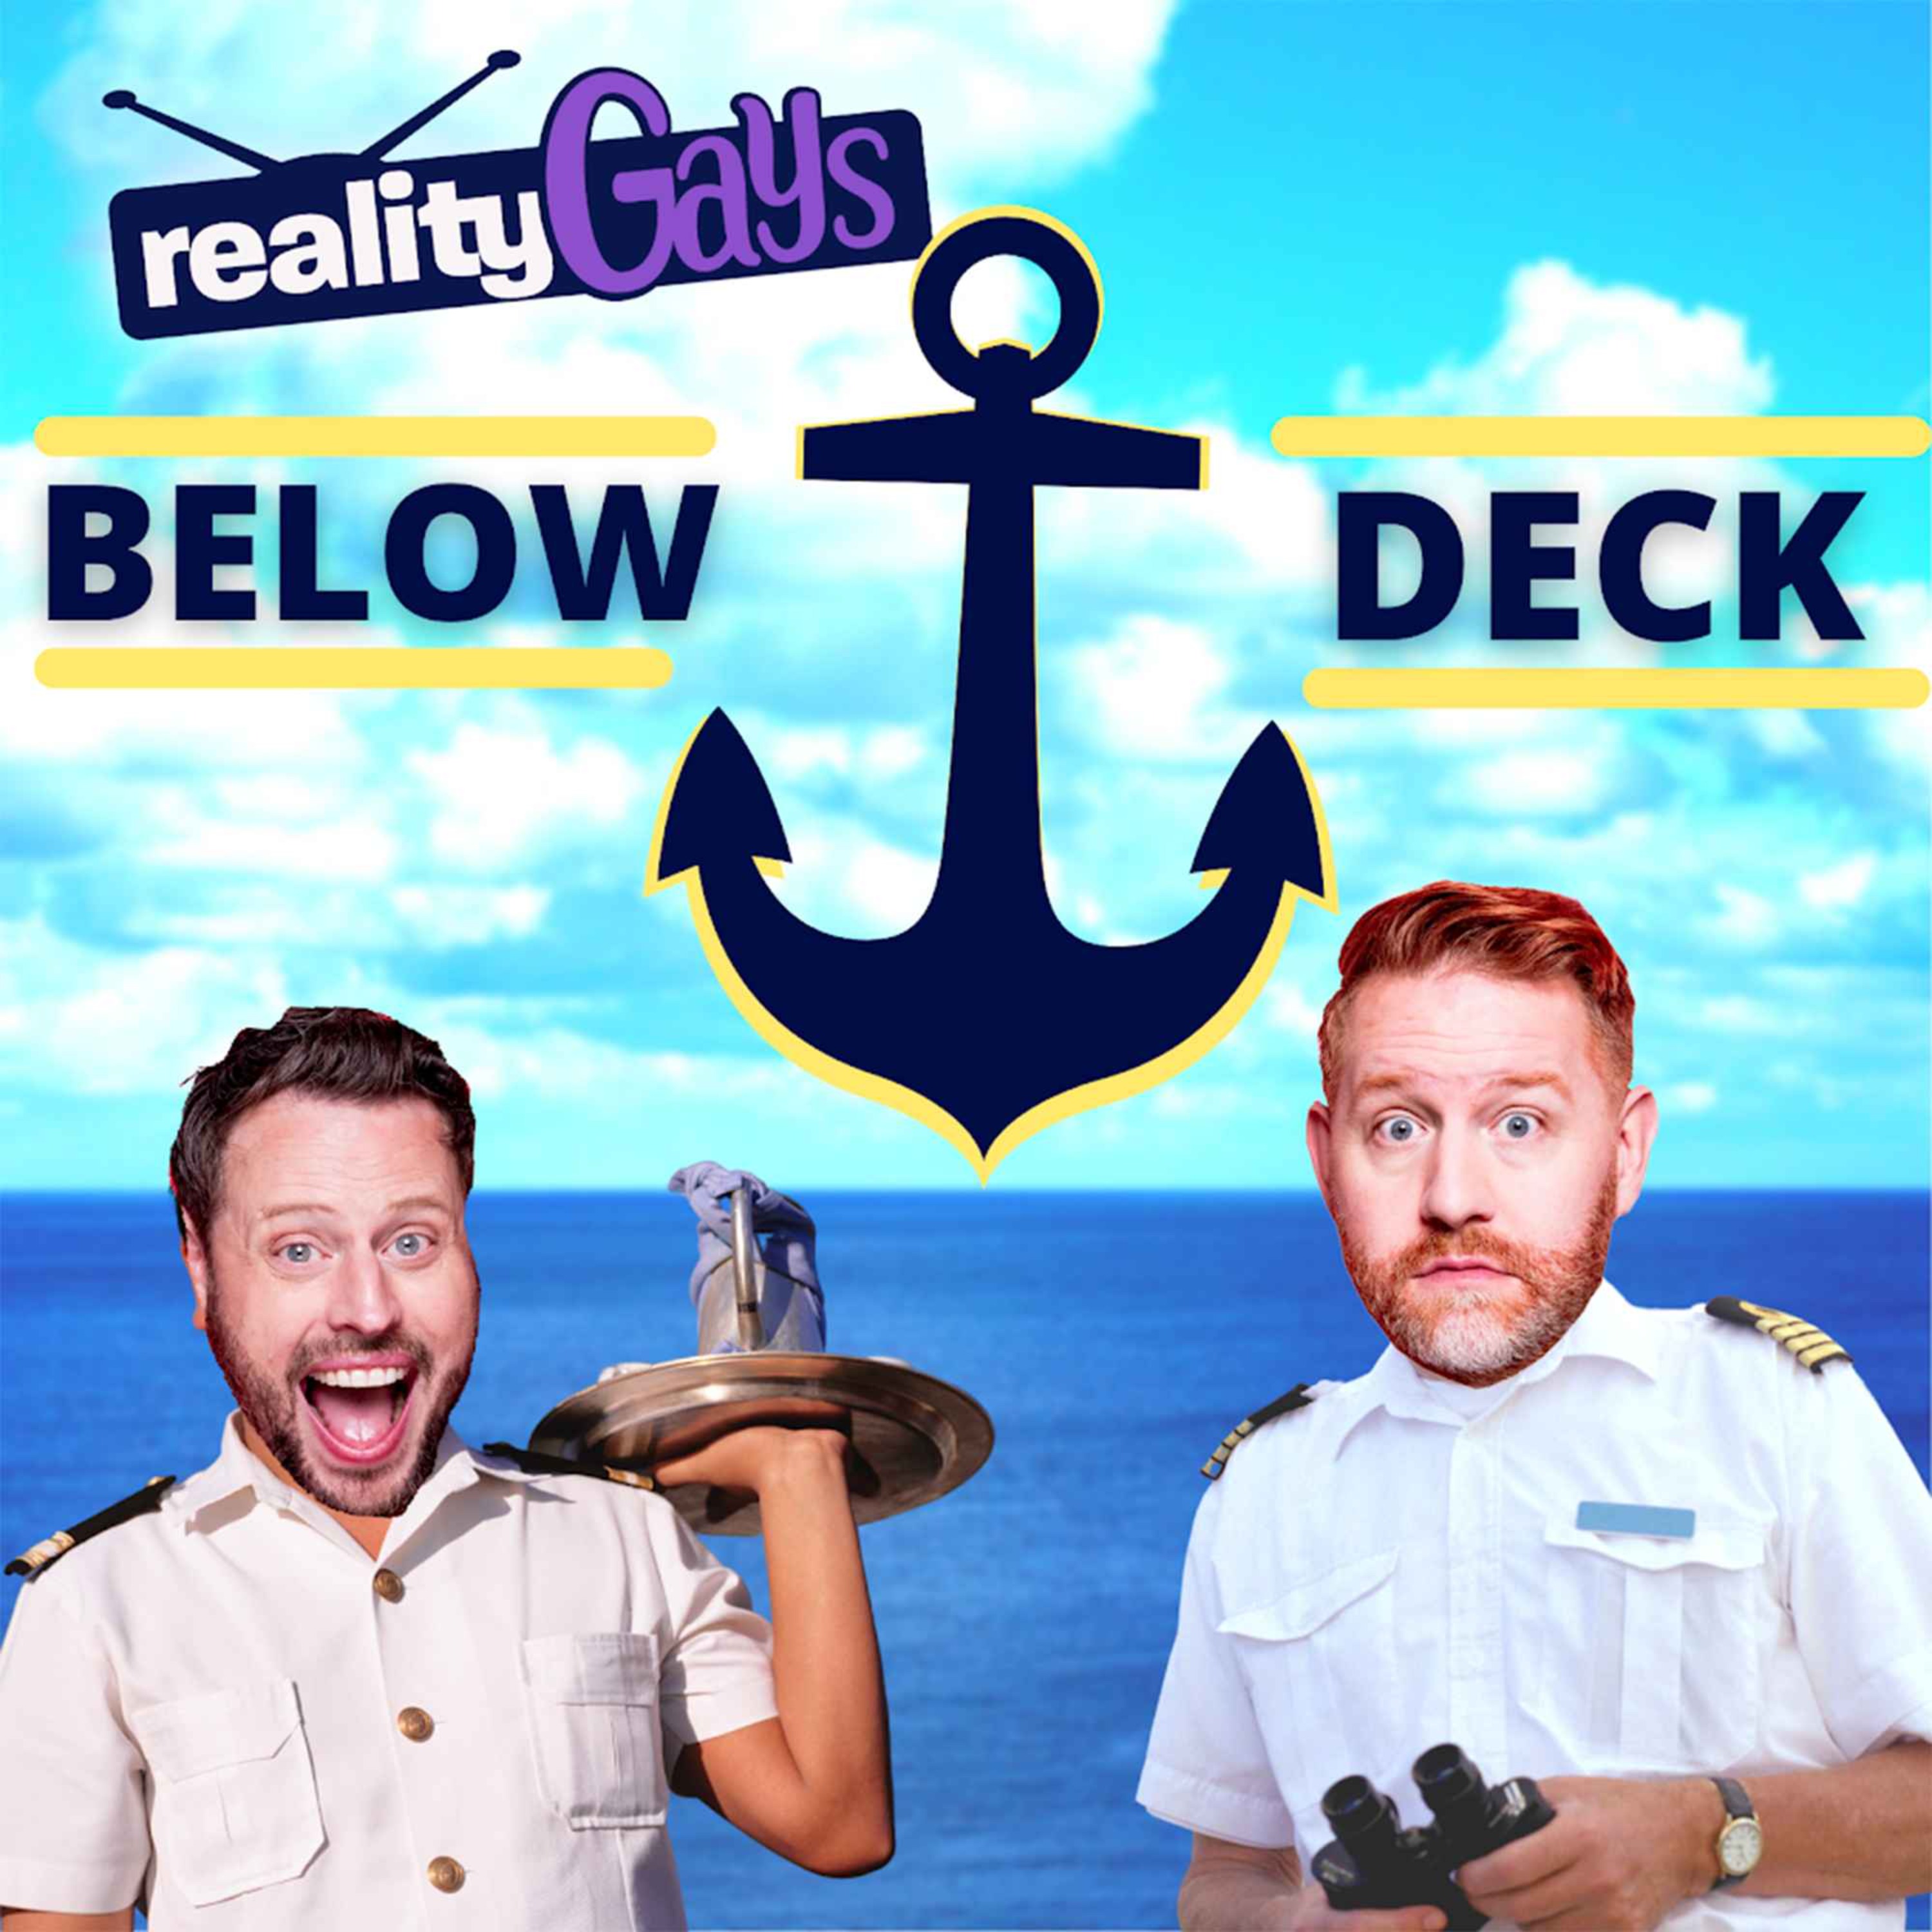 BELOW DECK: 1001 "Love Never Lasts At The Beach" Image